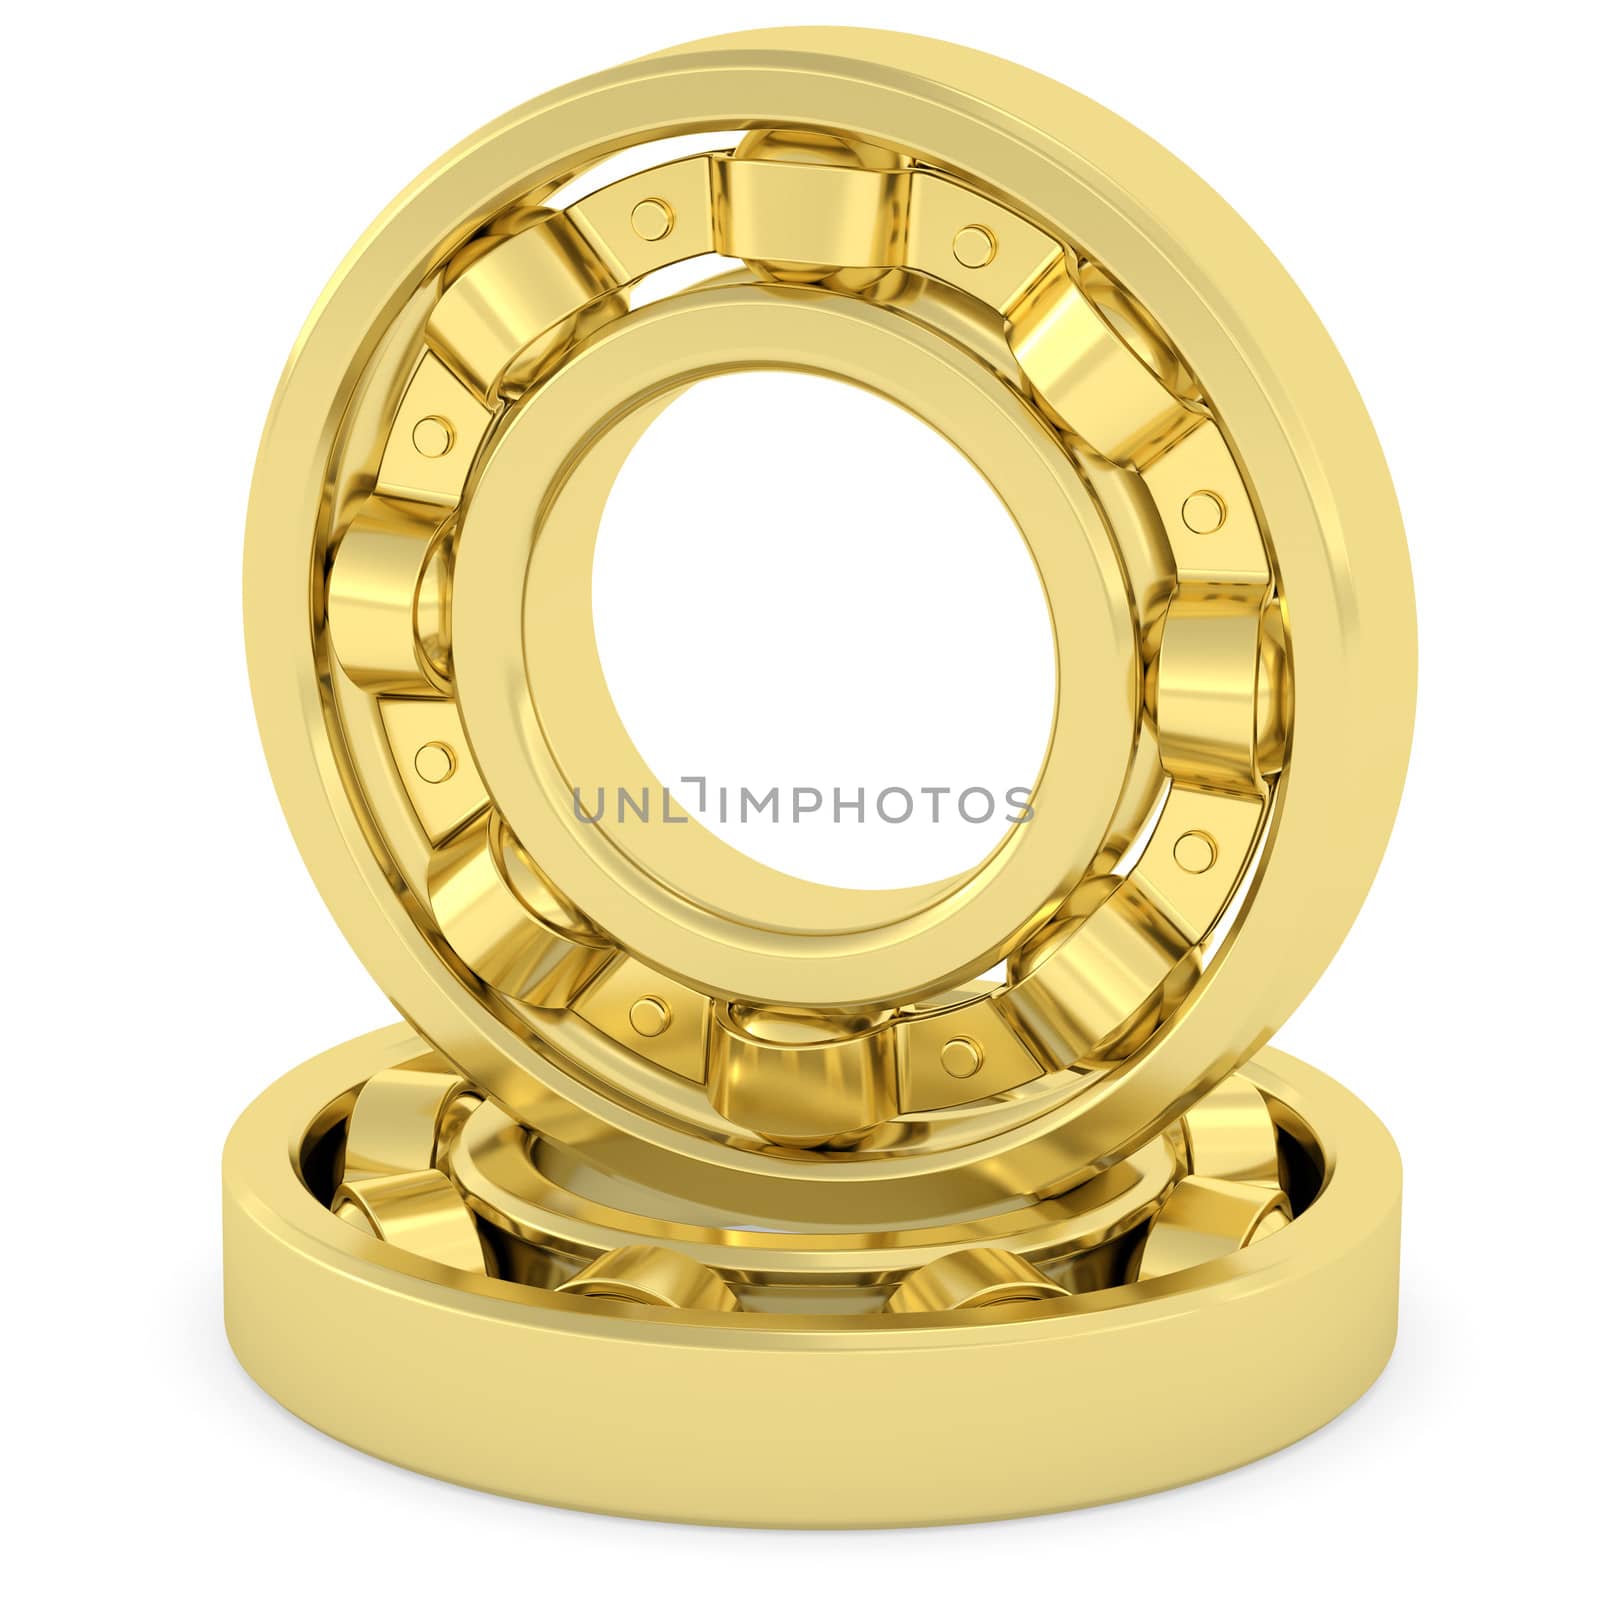 Golden bearings on white background. High resolution 3D image rendered with soft shadows